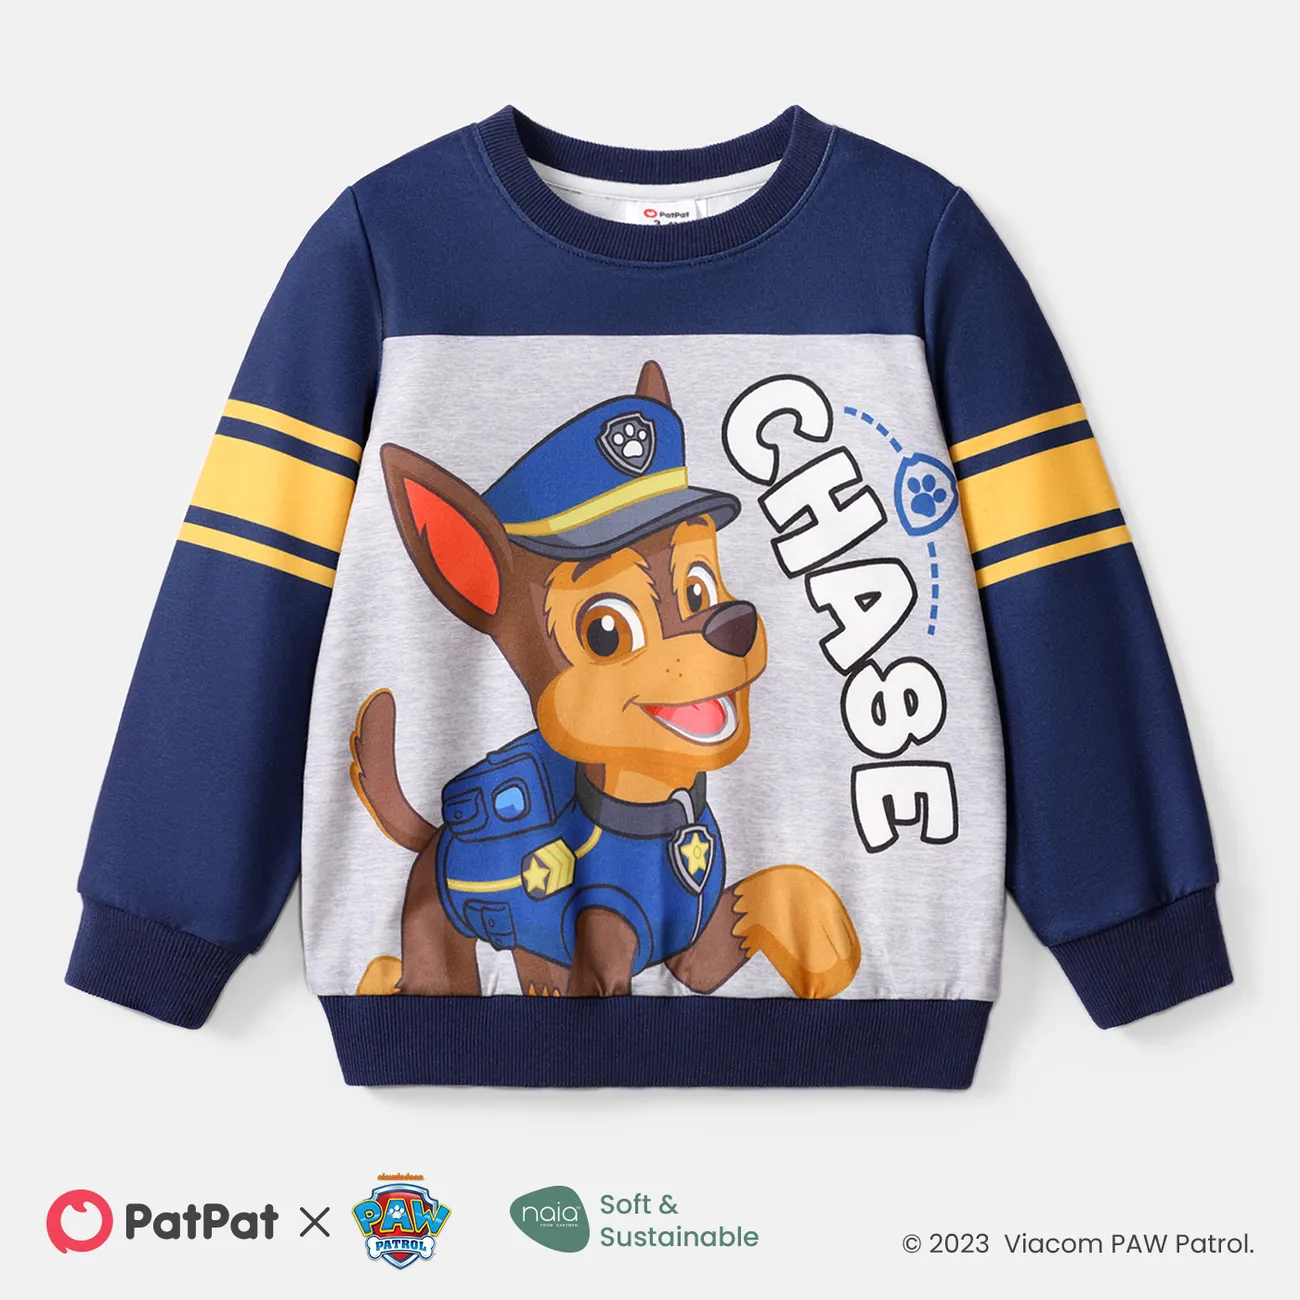 Pullover Girl/Boy Print Only PatPat $9.74 Toddler Sweatshirt US Naia™ Patrol PAW Character Mobile